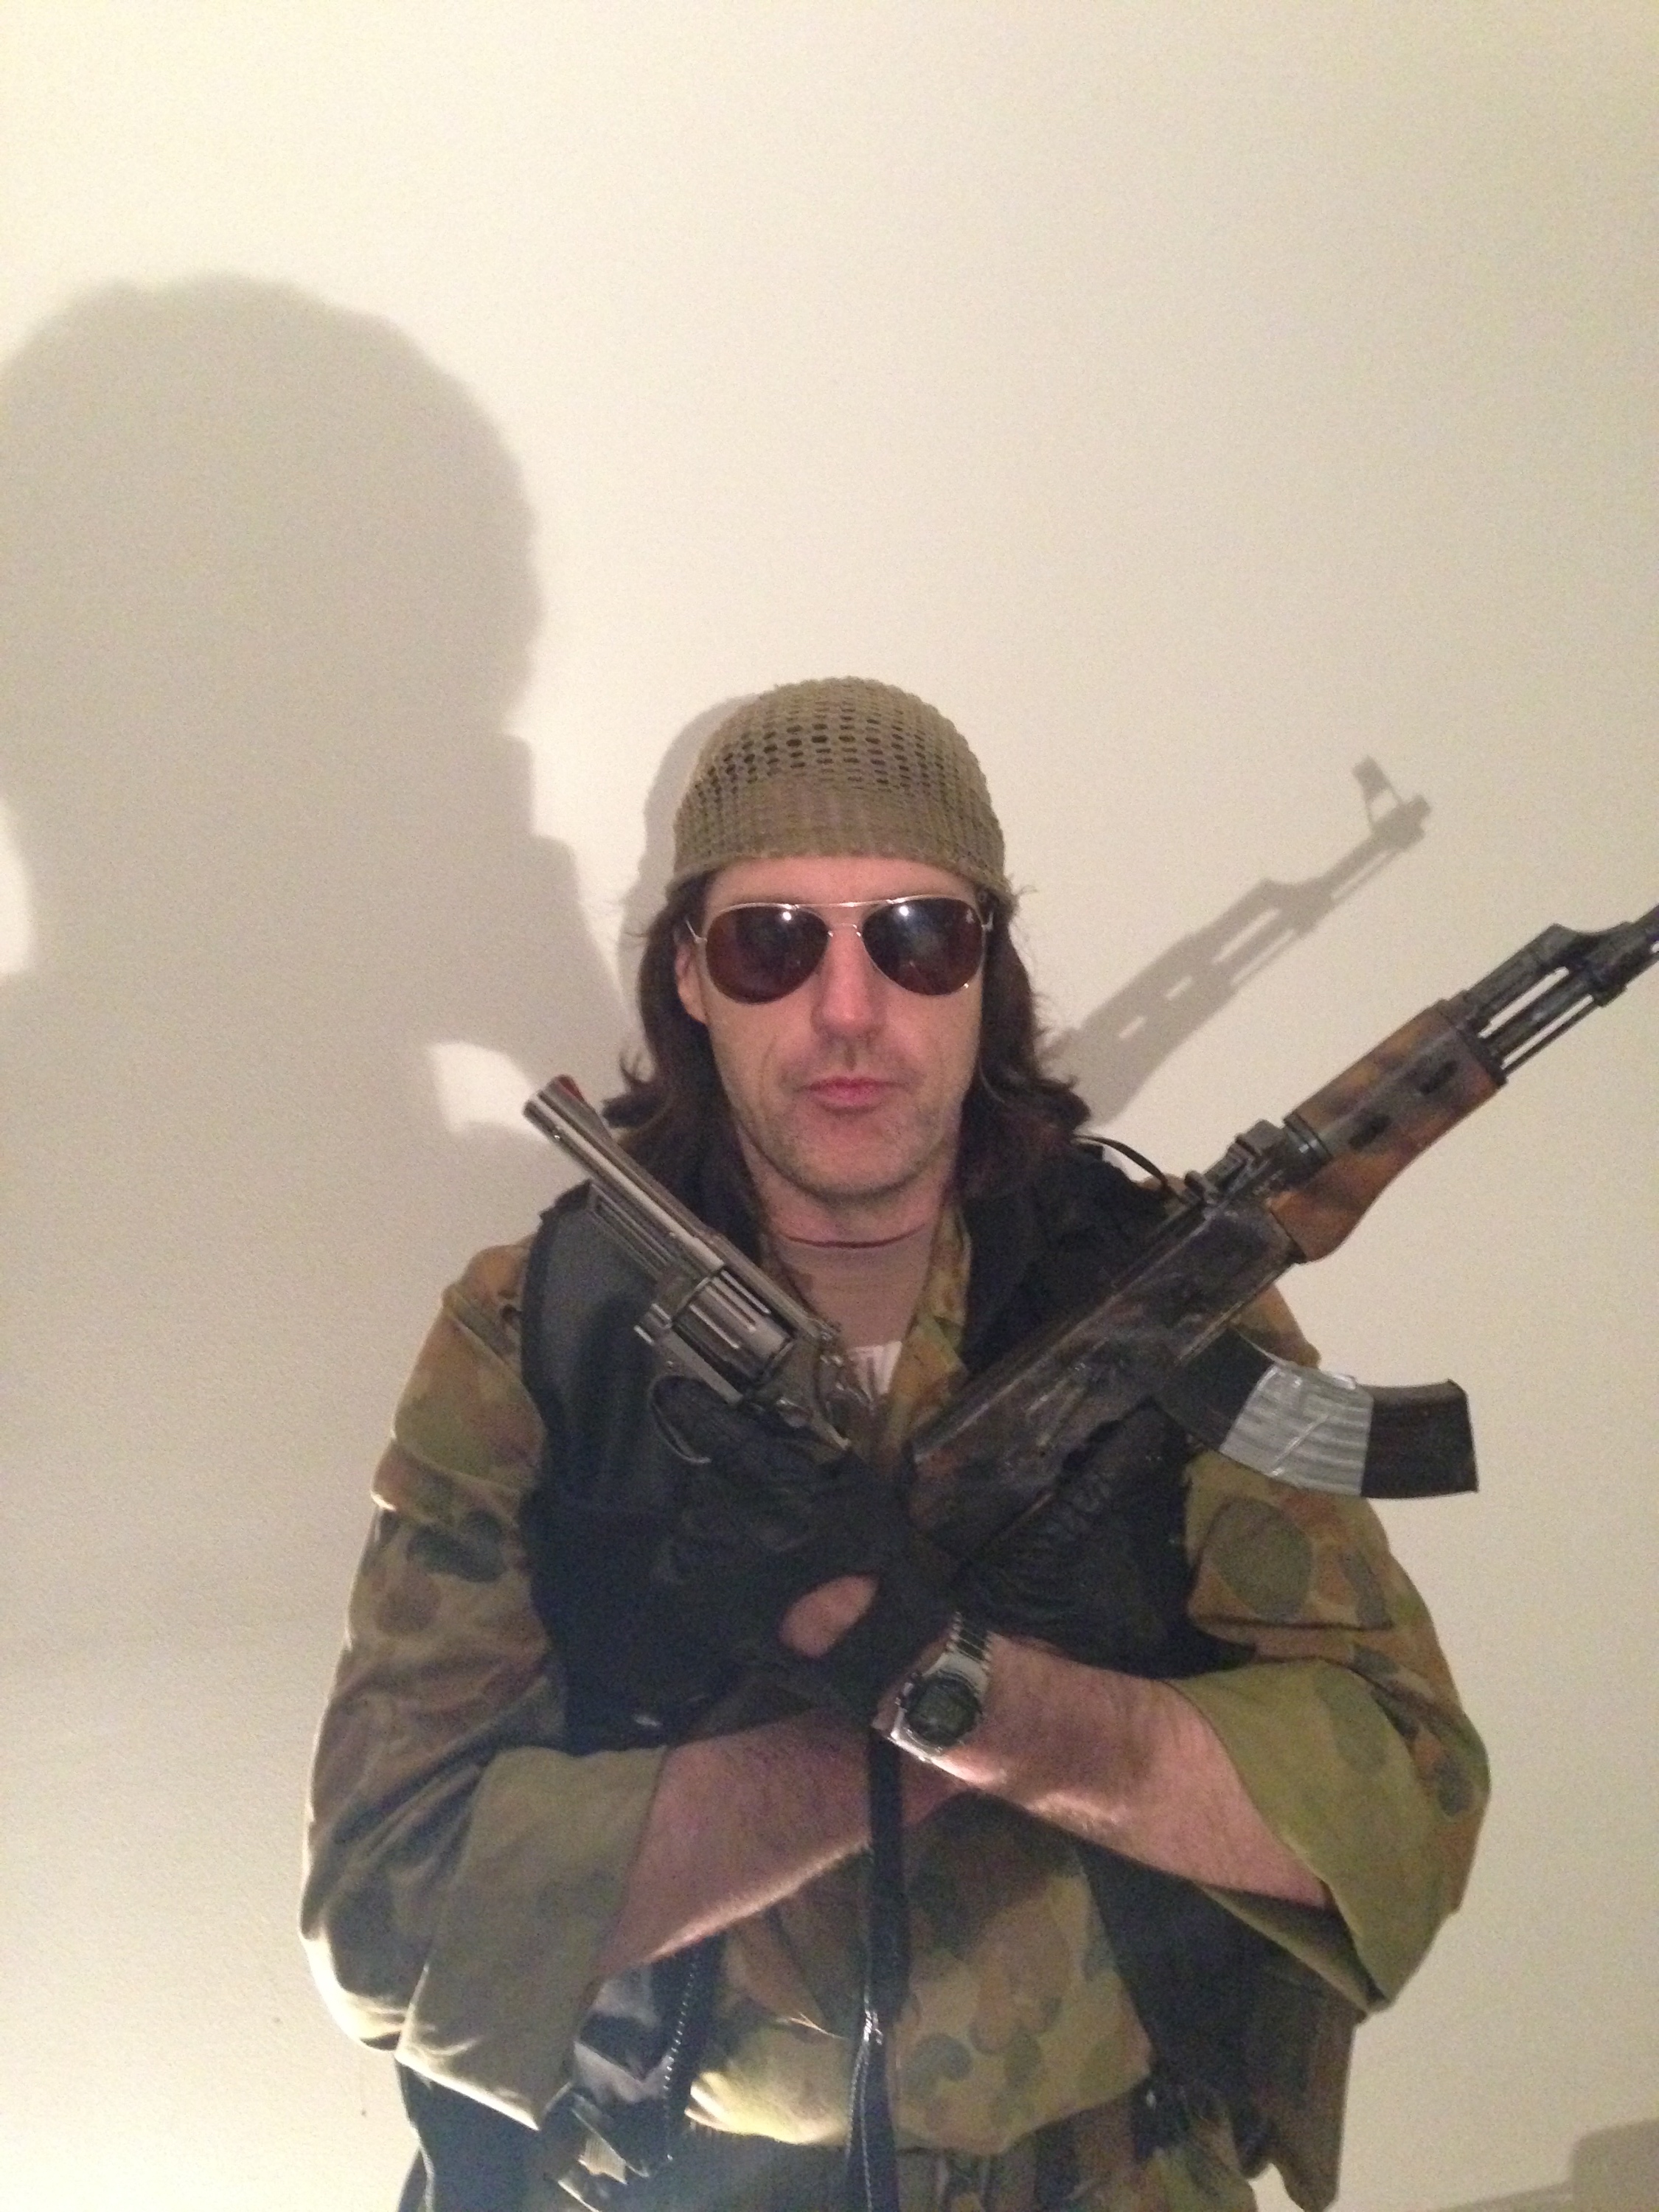 Craig Griffin as Rambo on the set of The Battlefield